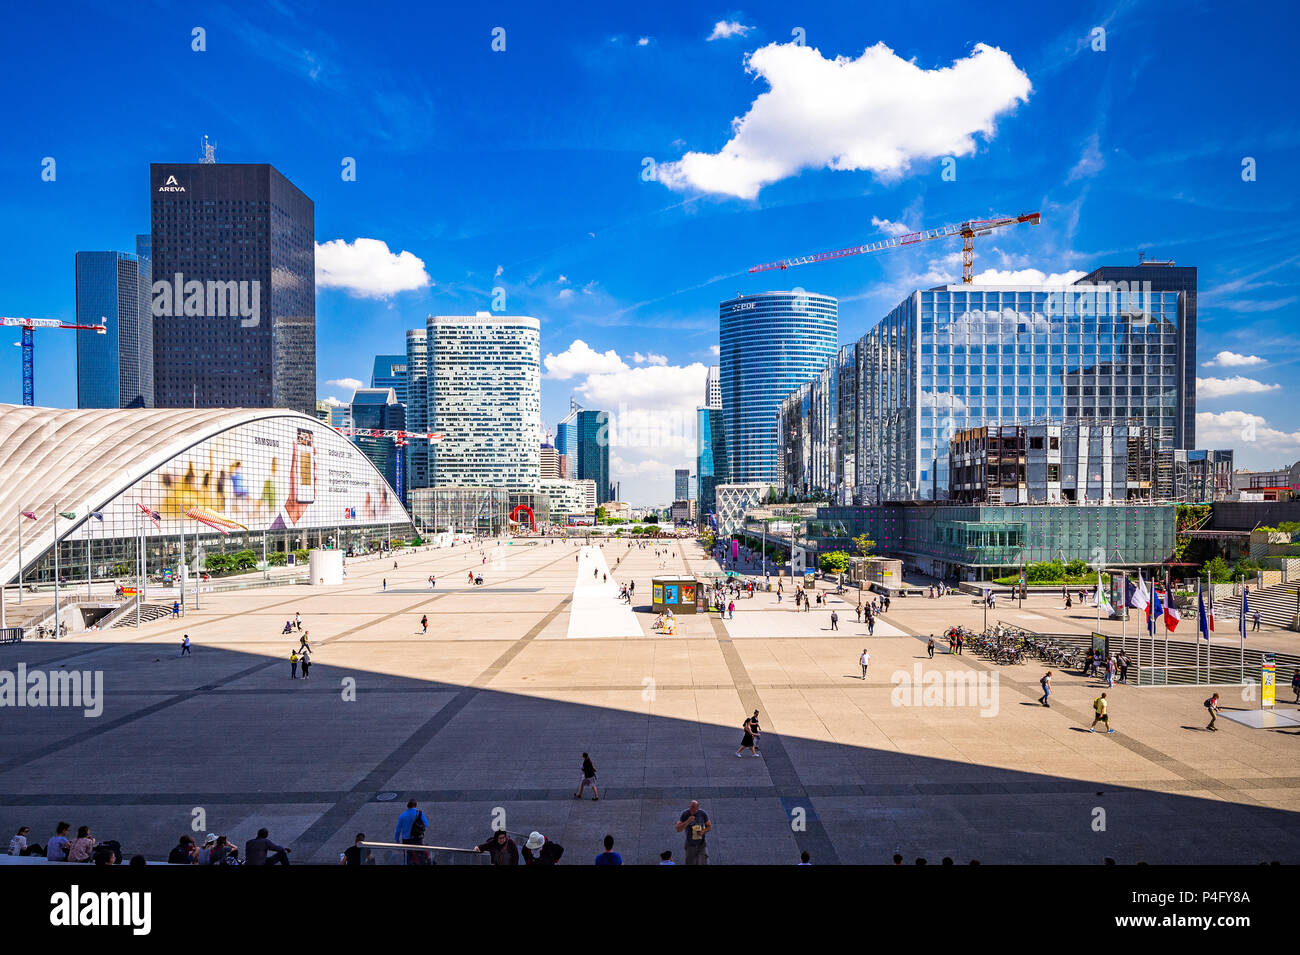 The strange yet wonderful La Defense area in Paris, France that houses an open-air museum. Stock Photo